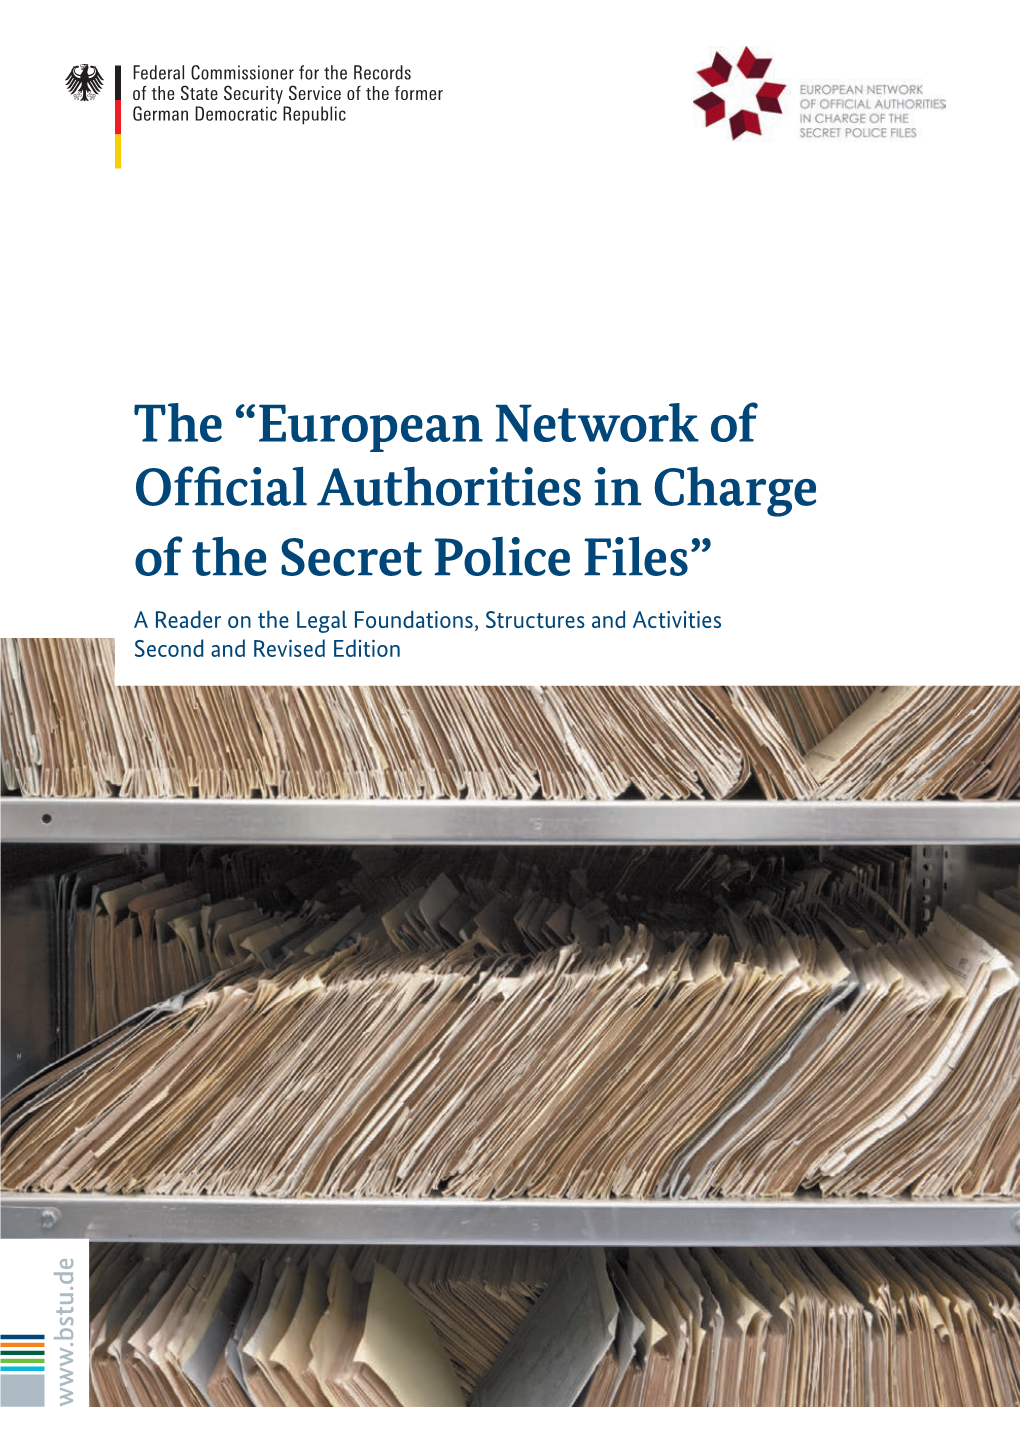 The “European Network of Official Authorities in Charge of the Secret Police Files”